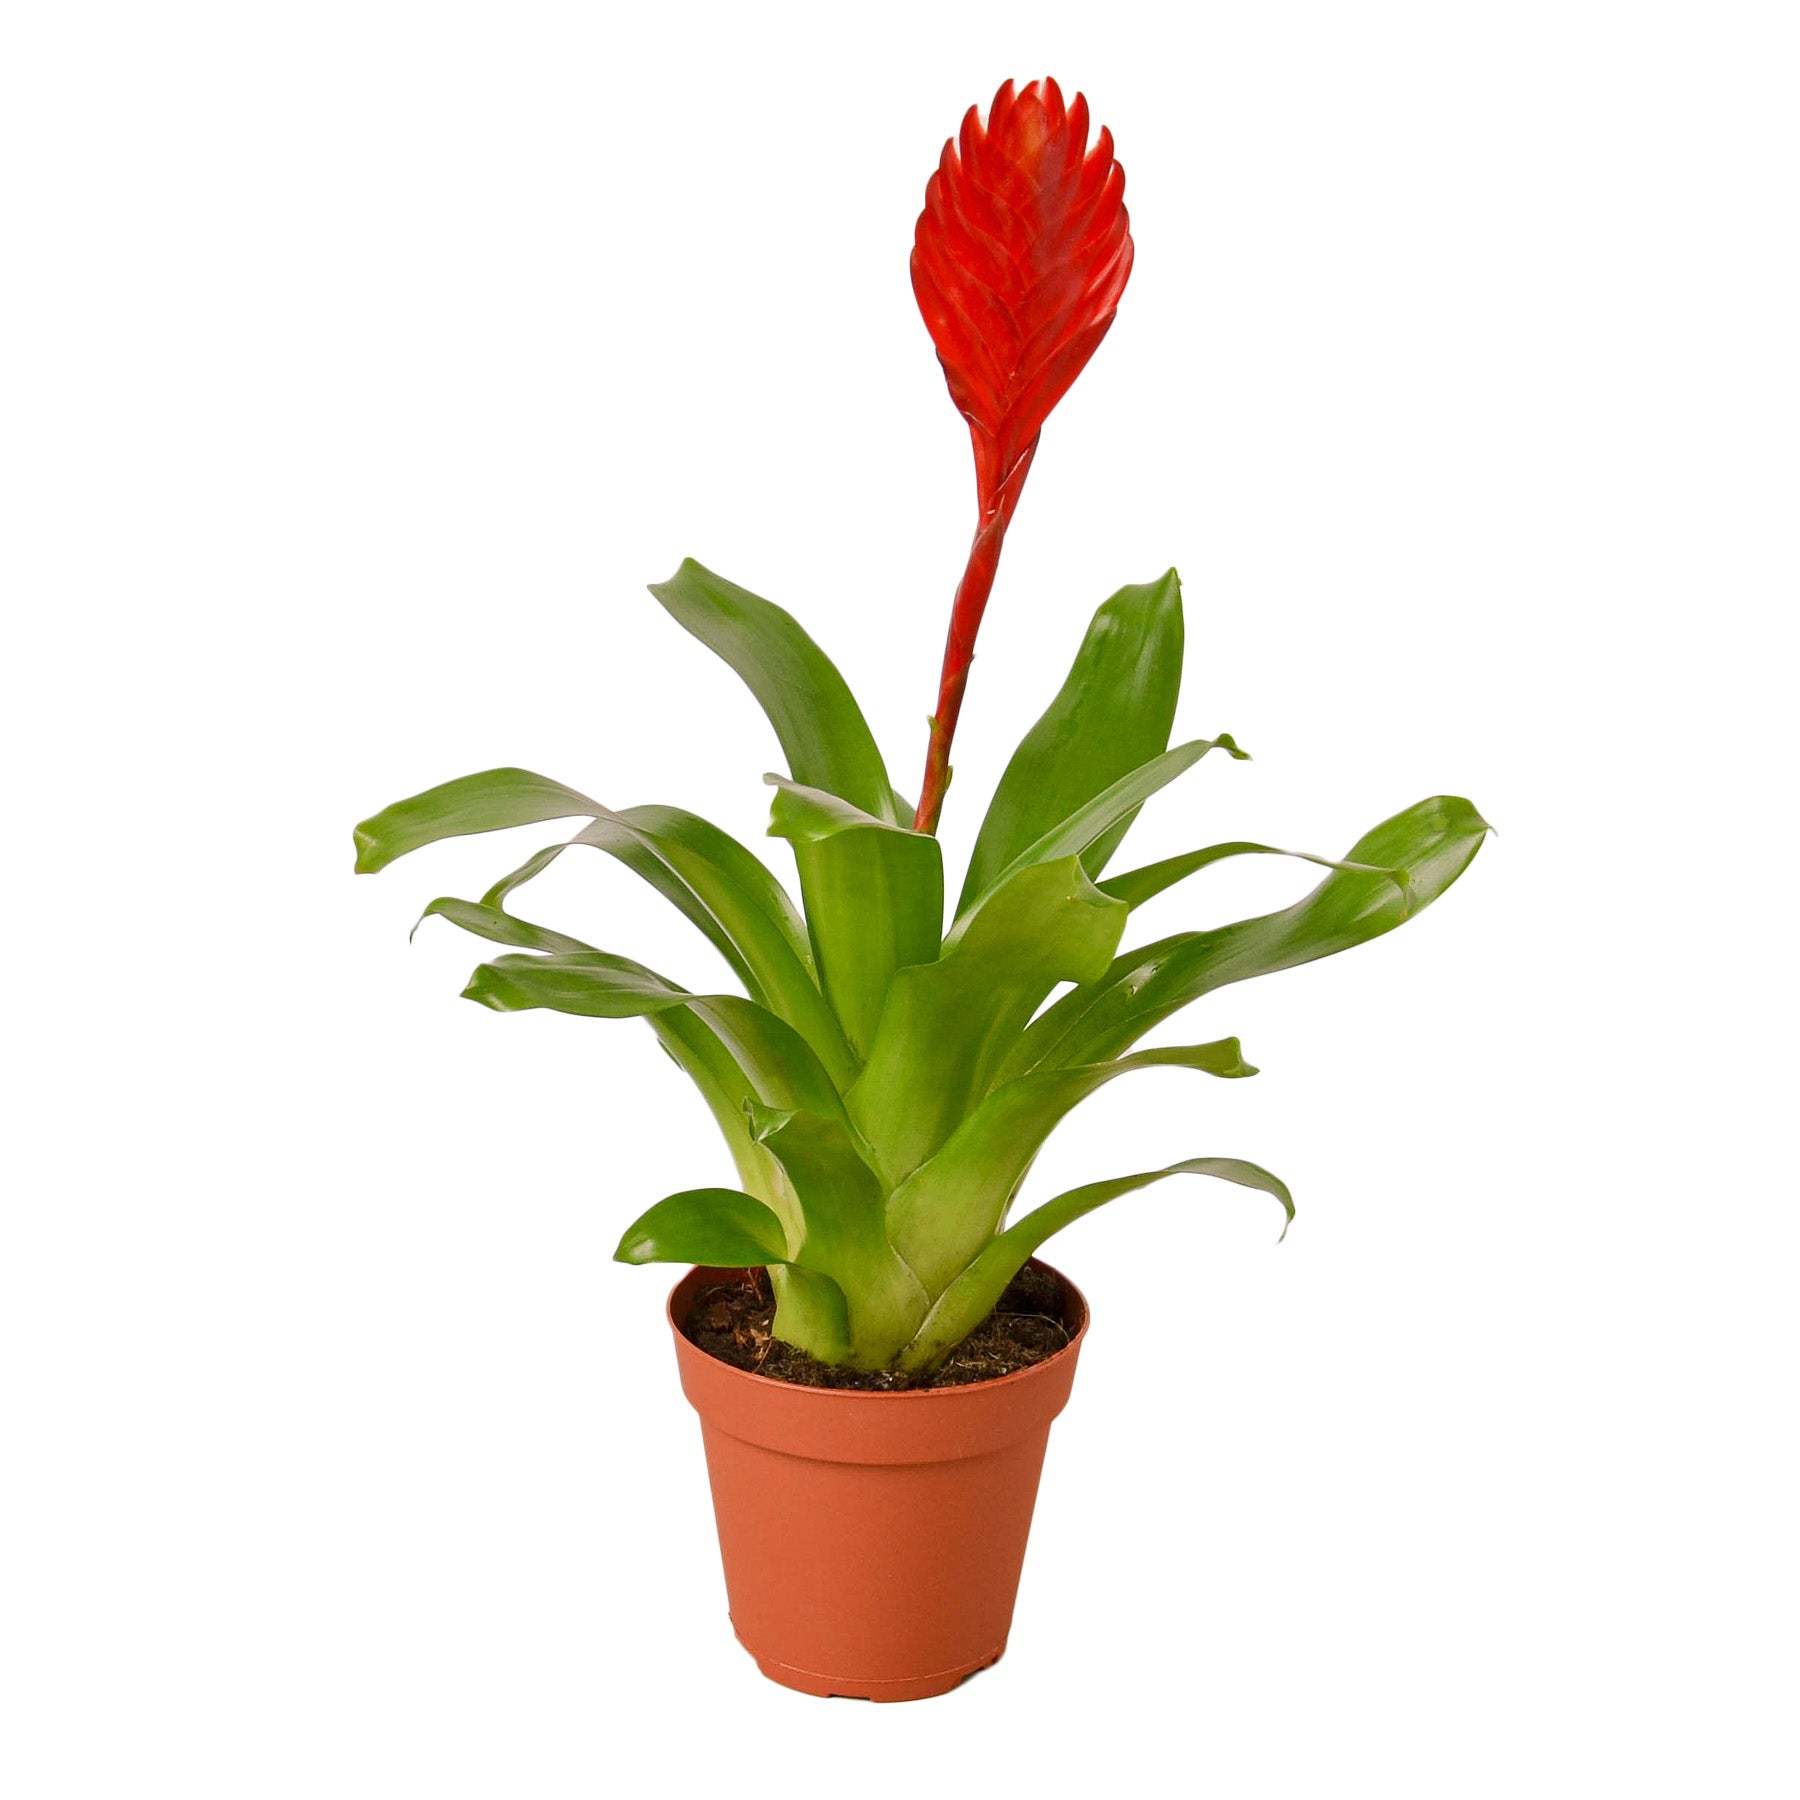 A red plant in a pot.